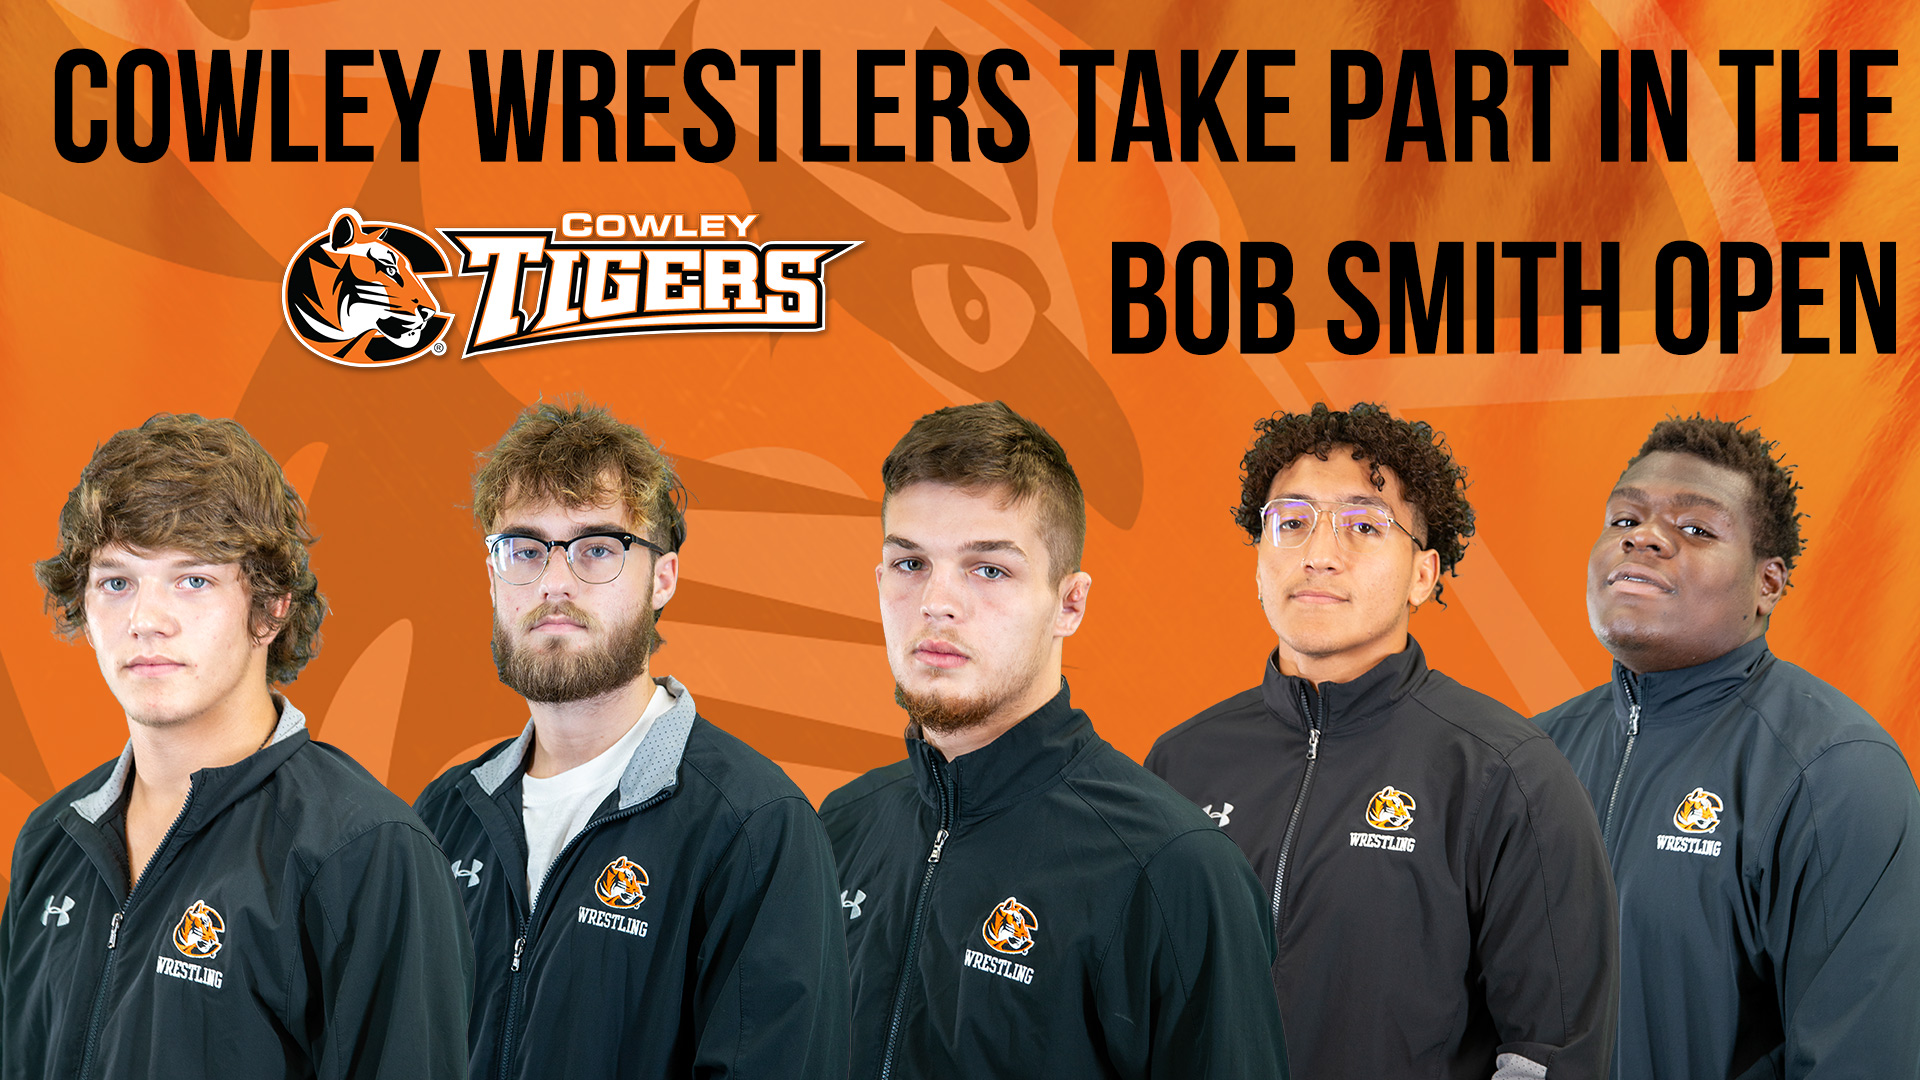 Cowley wrestlers take part in the Bob Smith Open